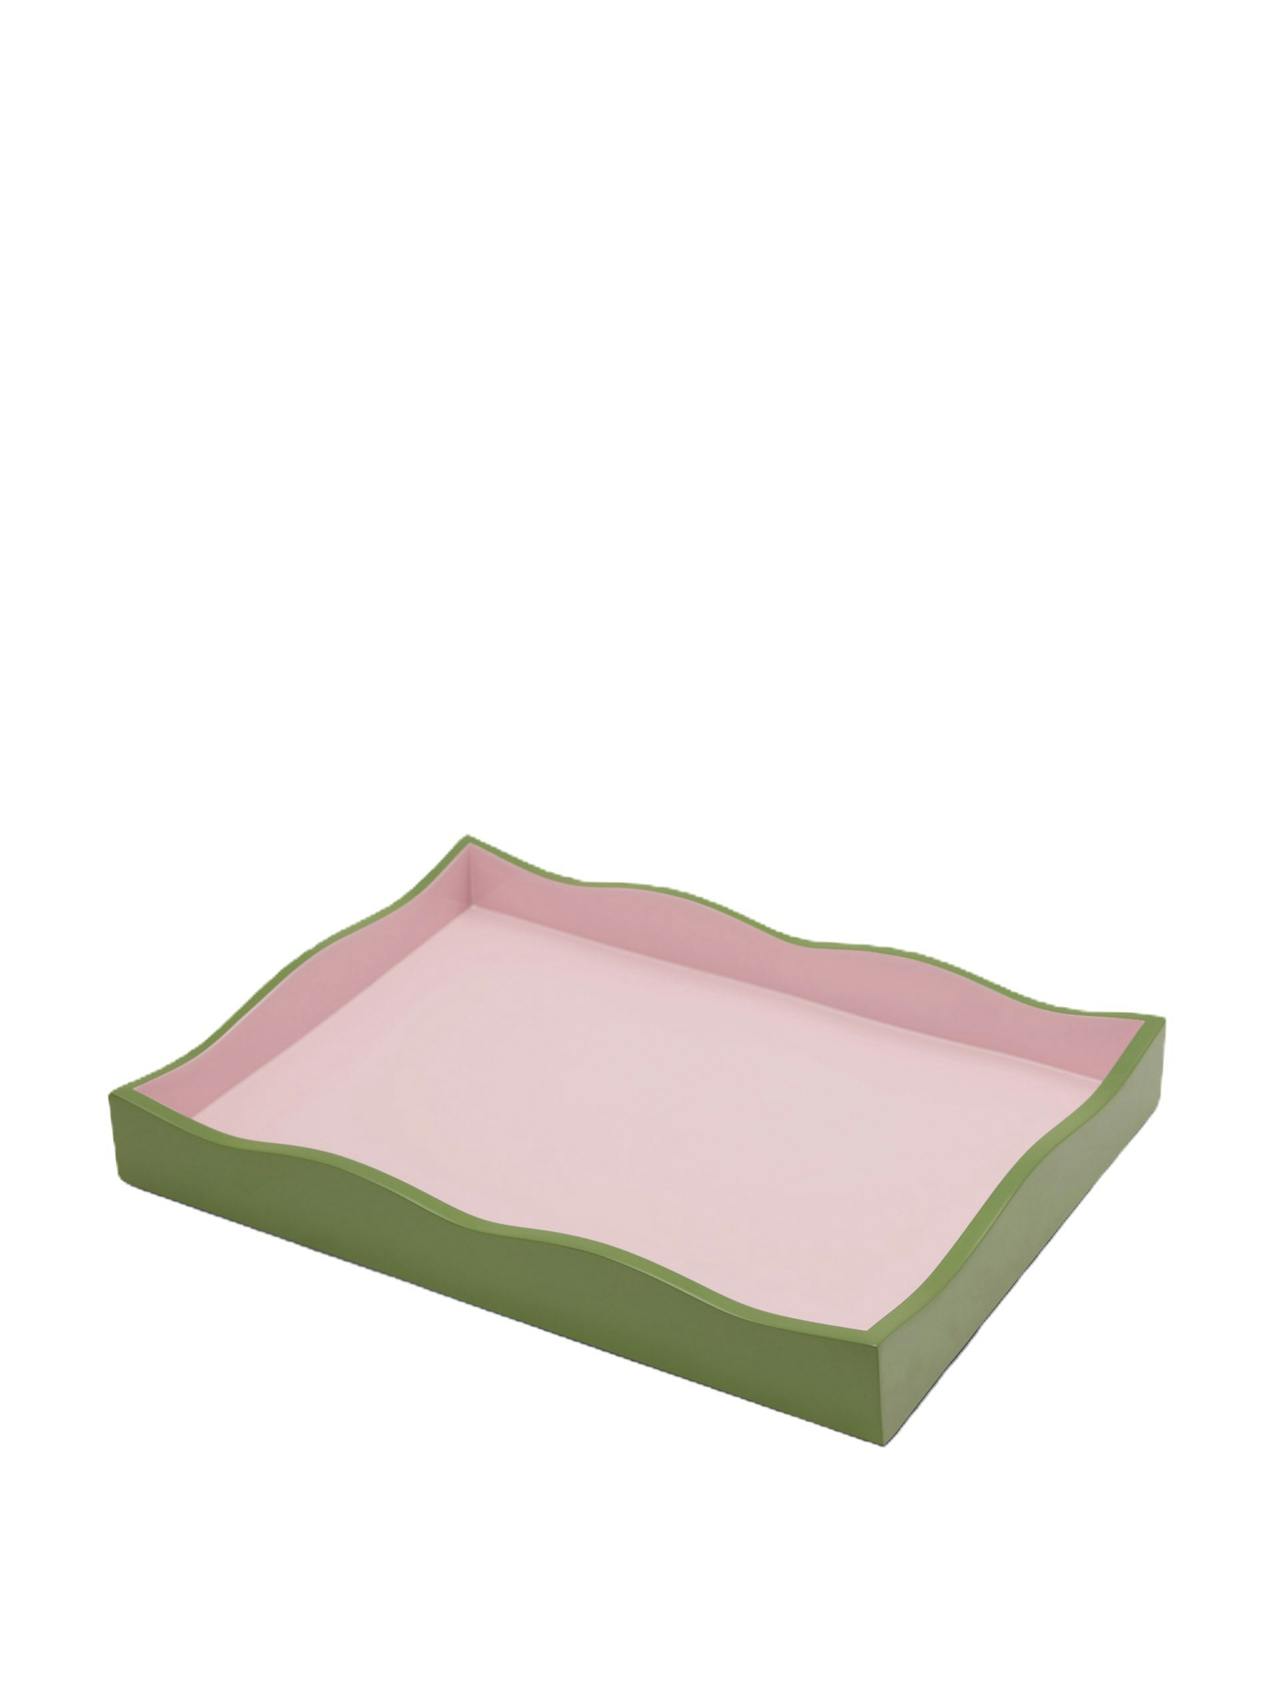 Wiggle tray in green and pink